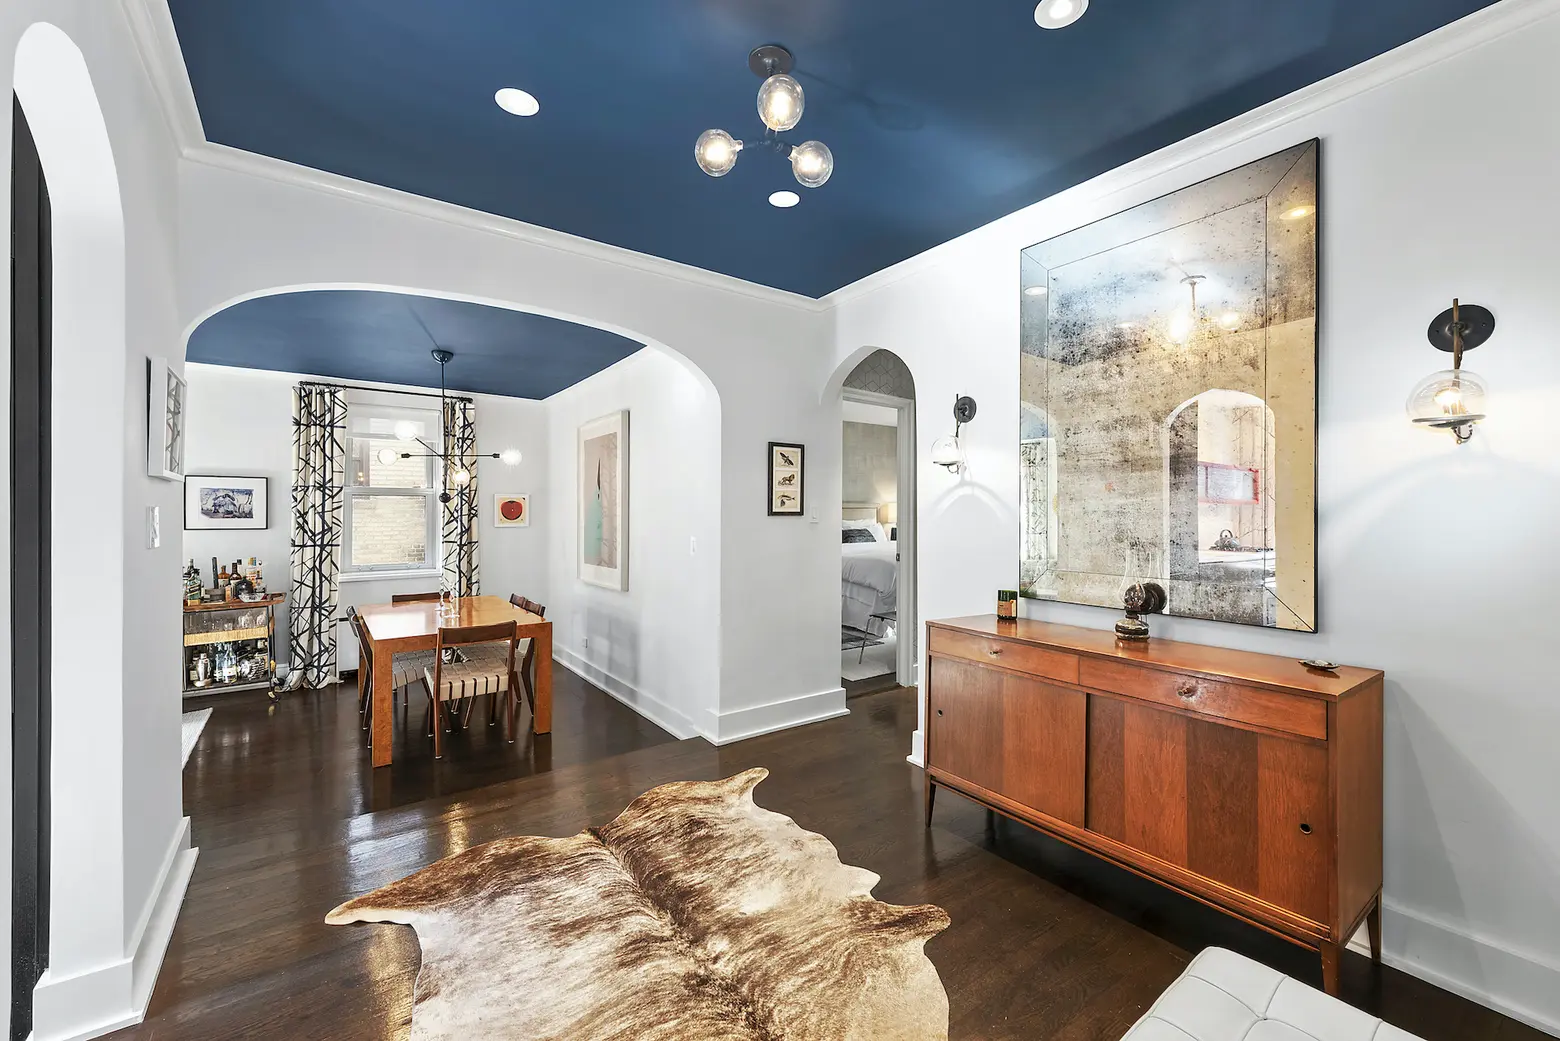 $1.3M West Village co-op feels like a ‘Hollywood bungalow’